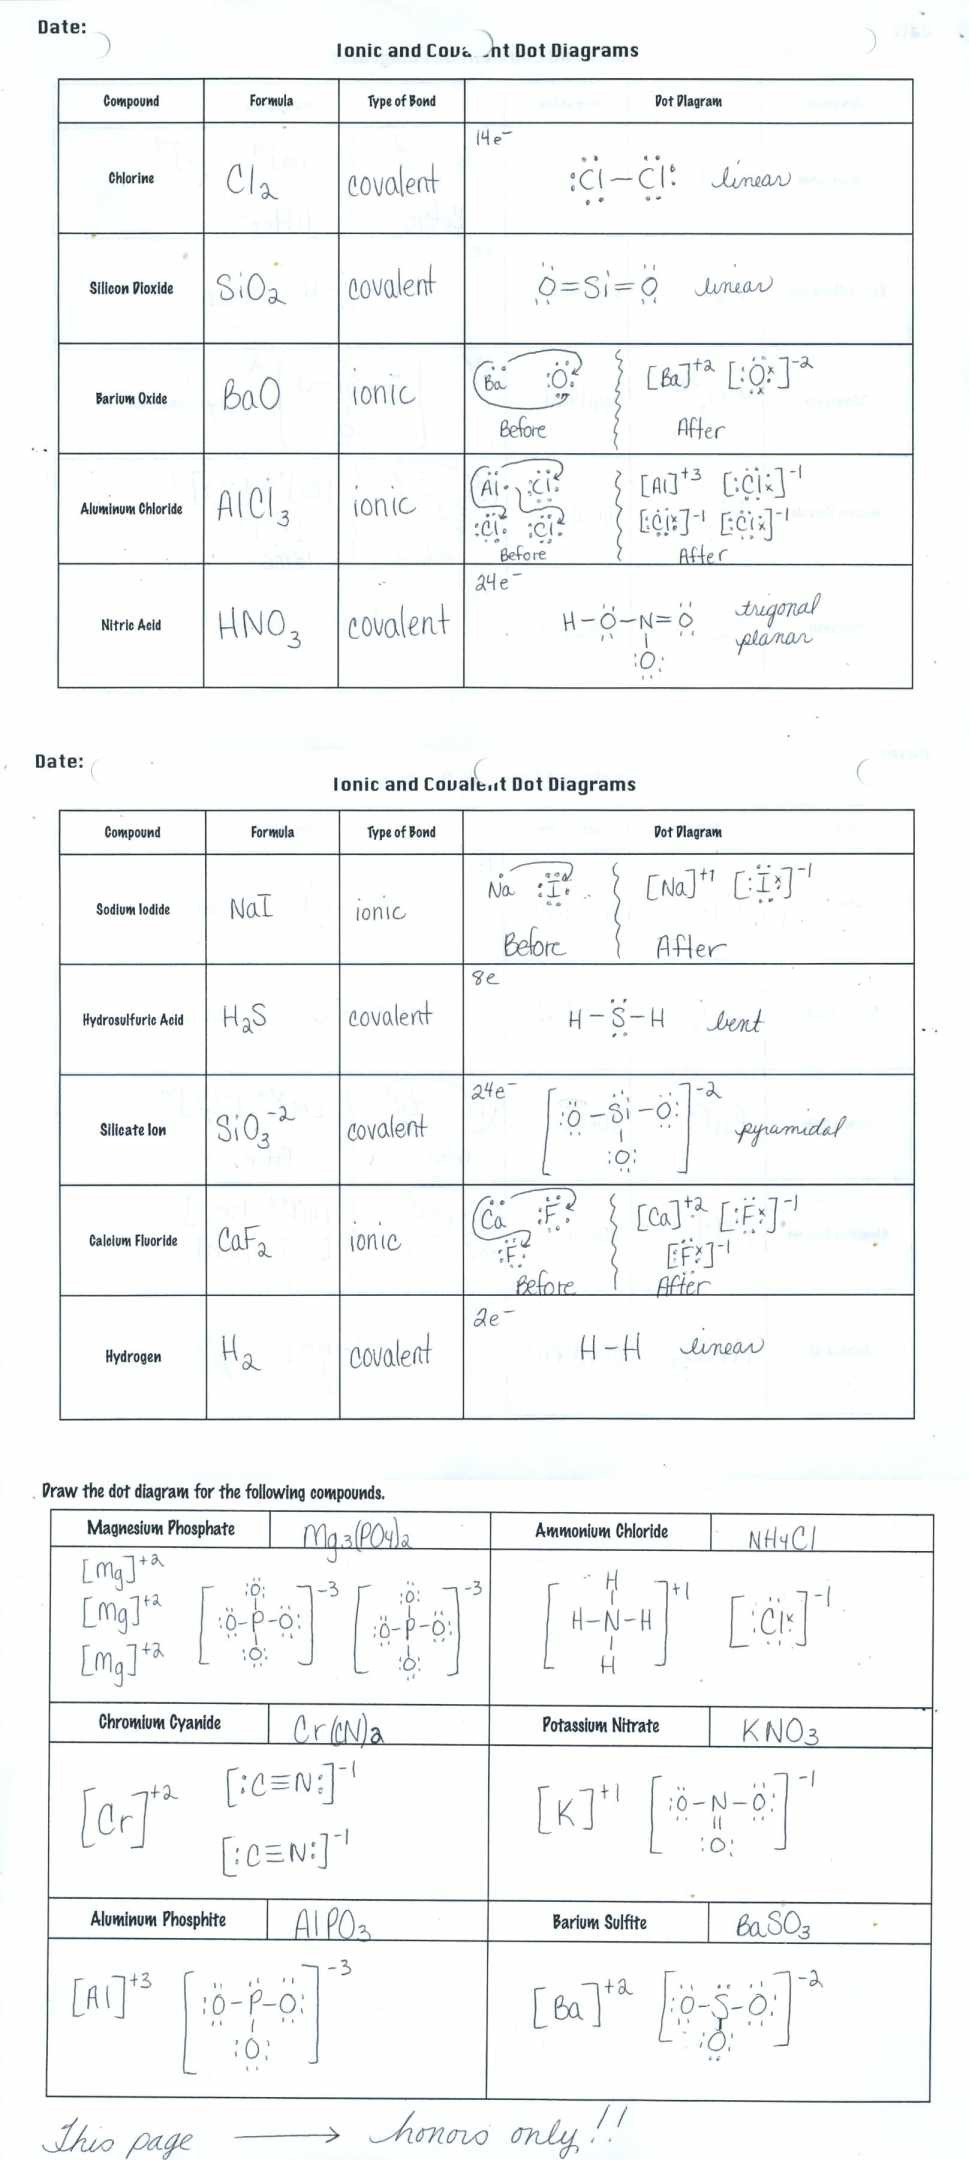 Overview Chemical Bonds Worksheet Chapter 20 Answers Luxury | db-excel.com